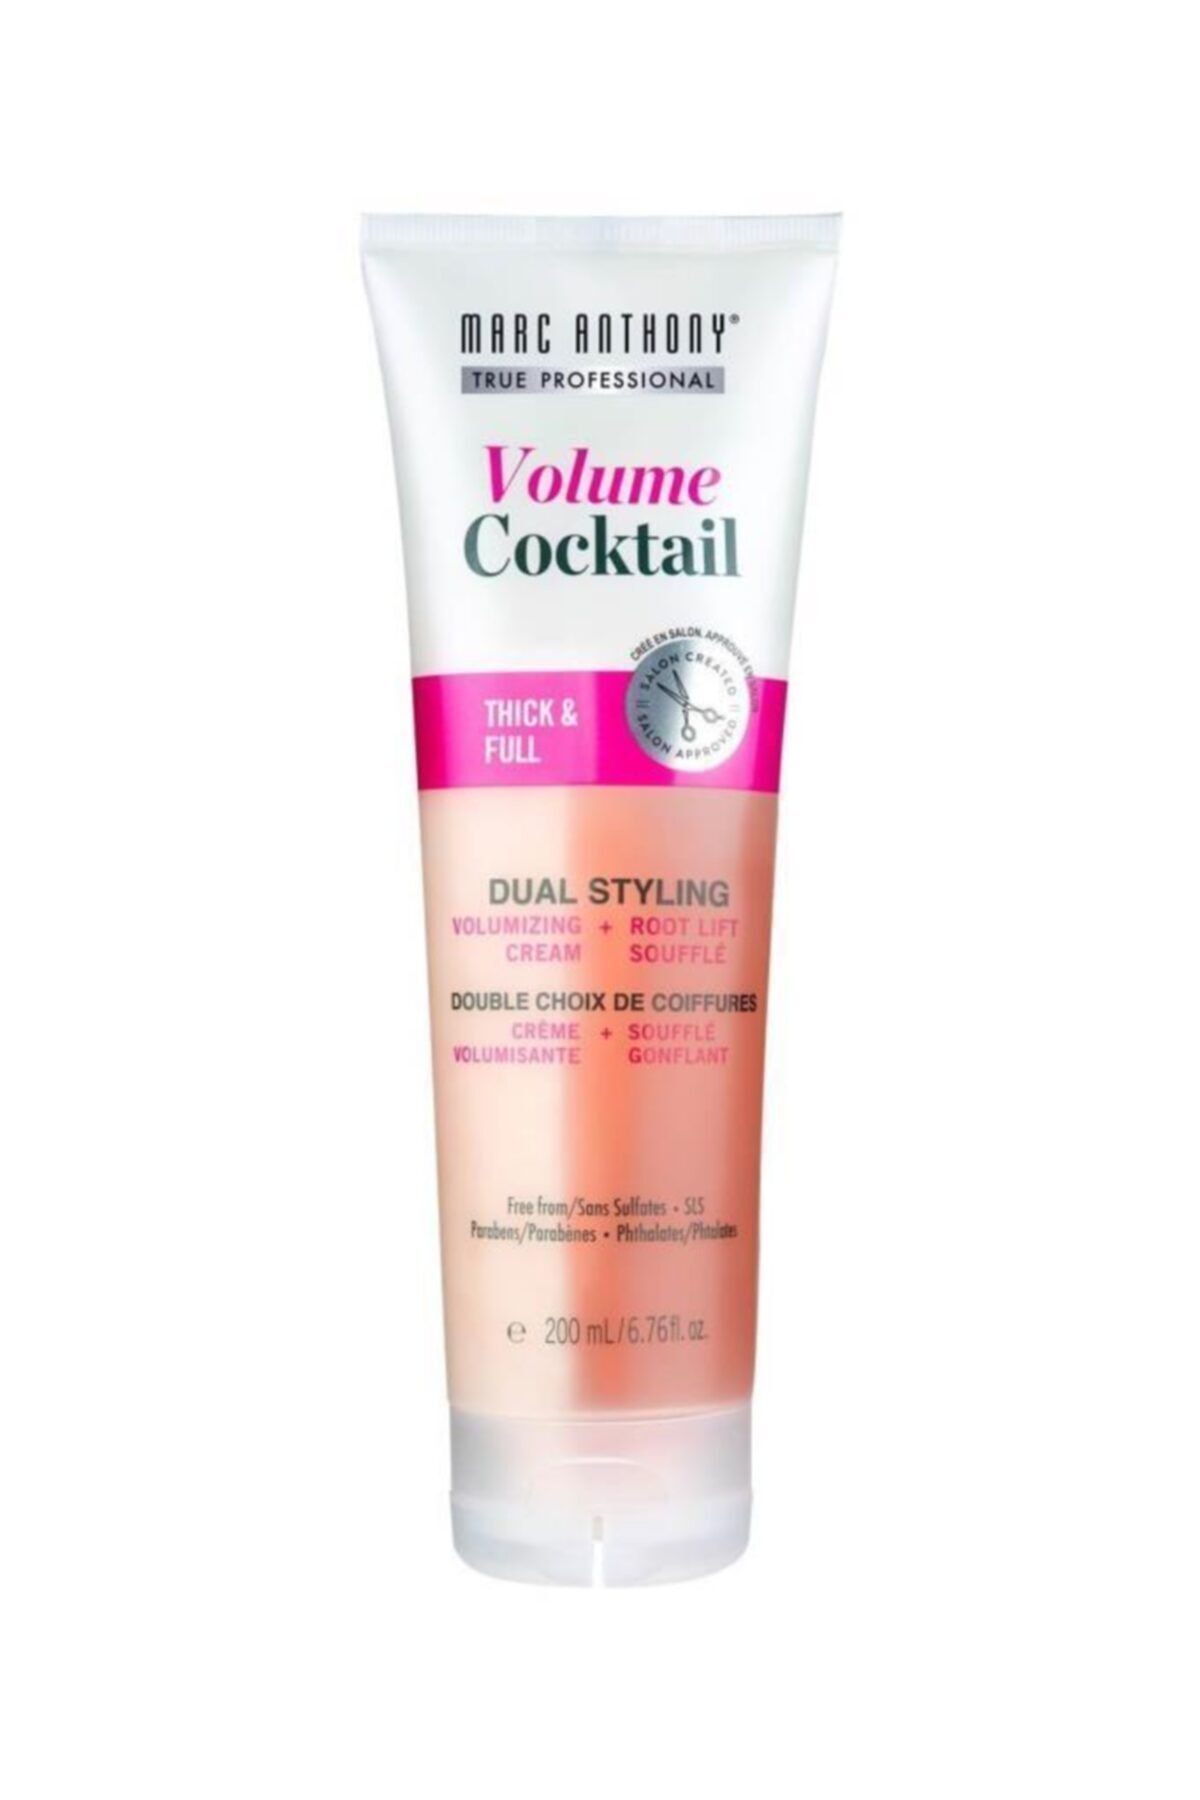 Marc Anthony Volume Cocktail Thick & Full Dual Styling 200 ml